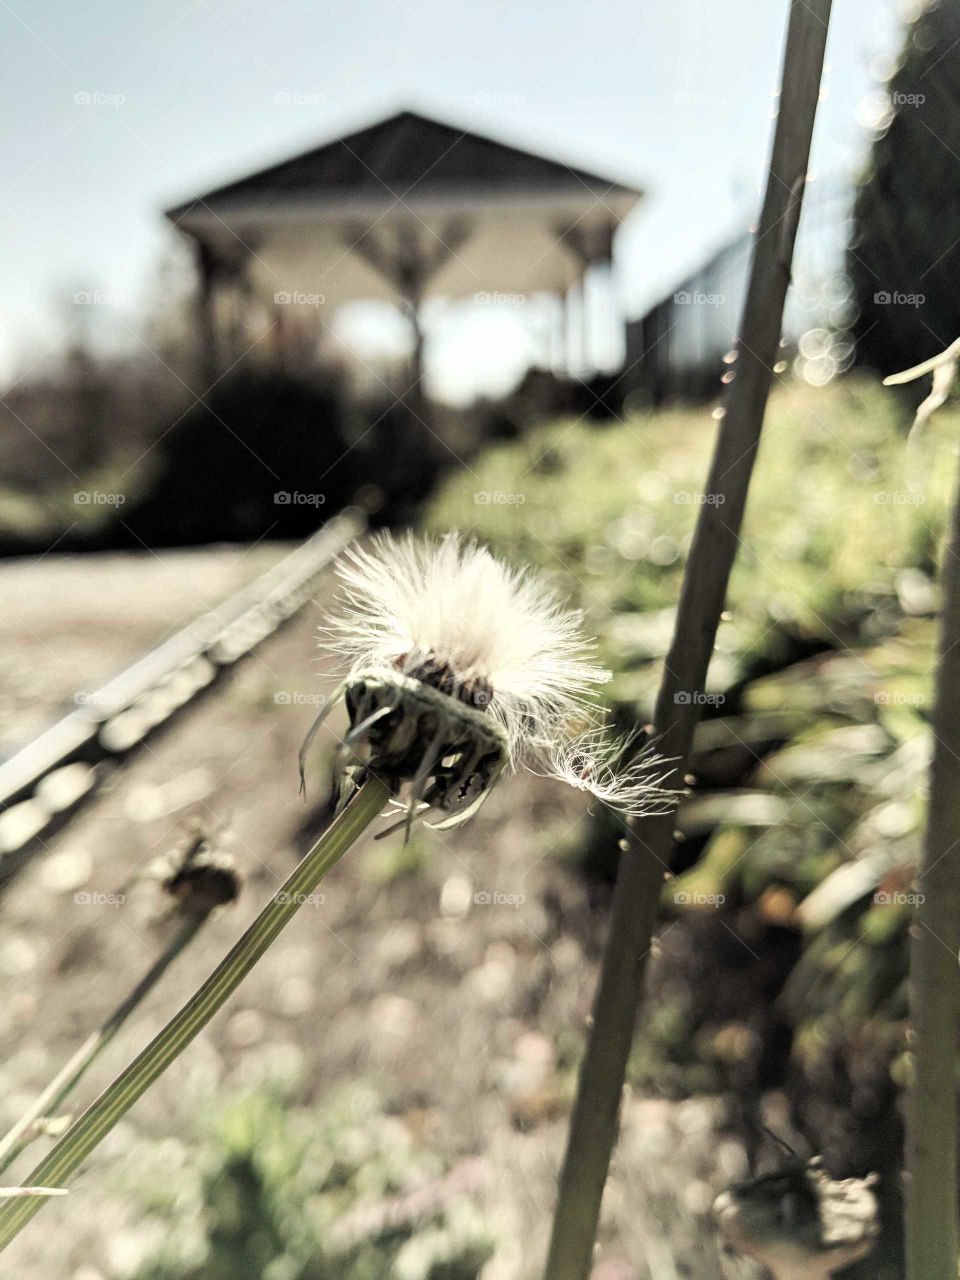 Dandelion Hopes and Wishes